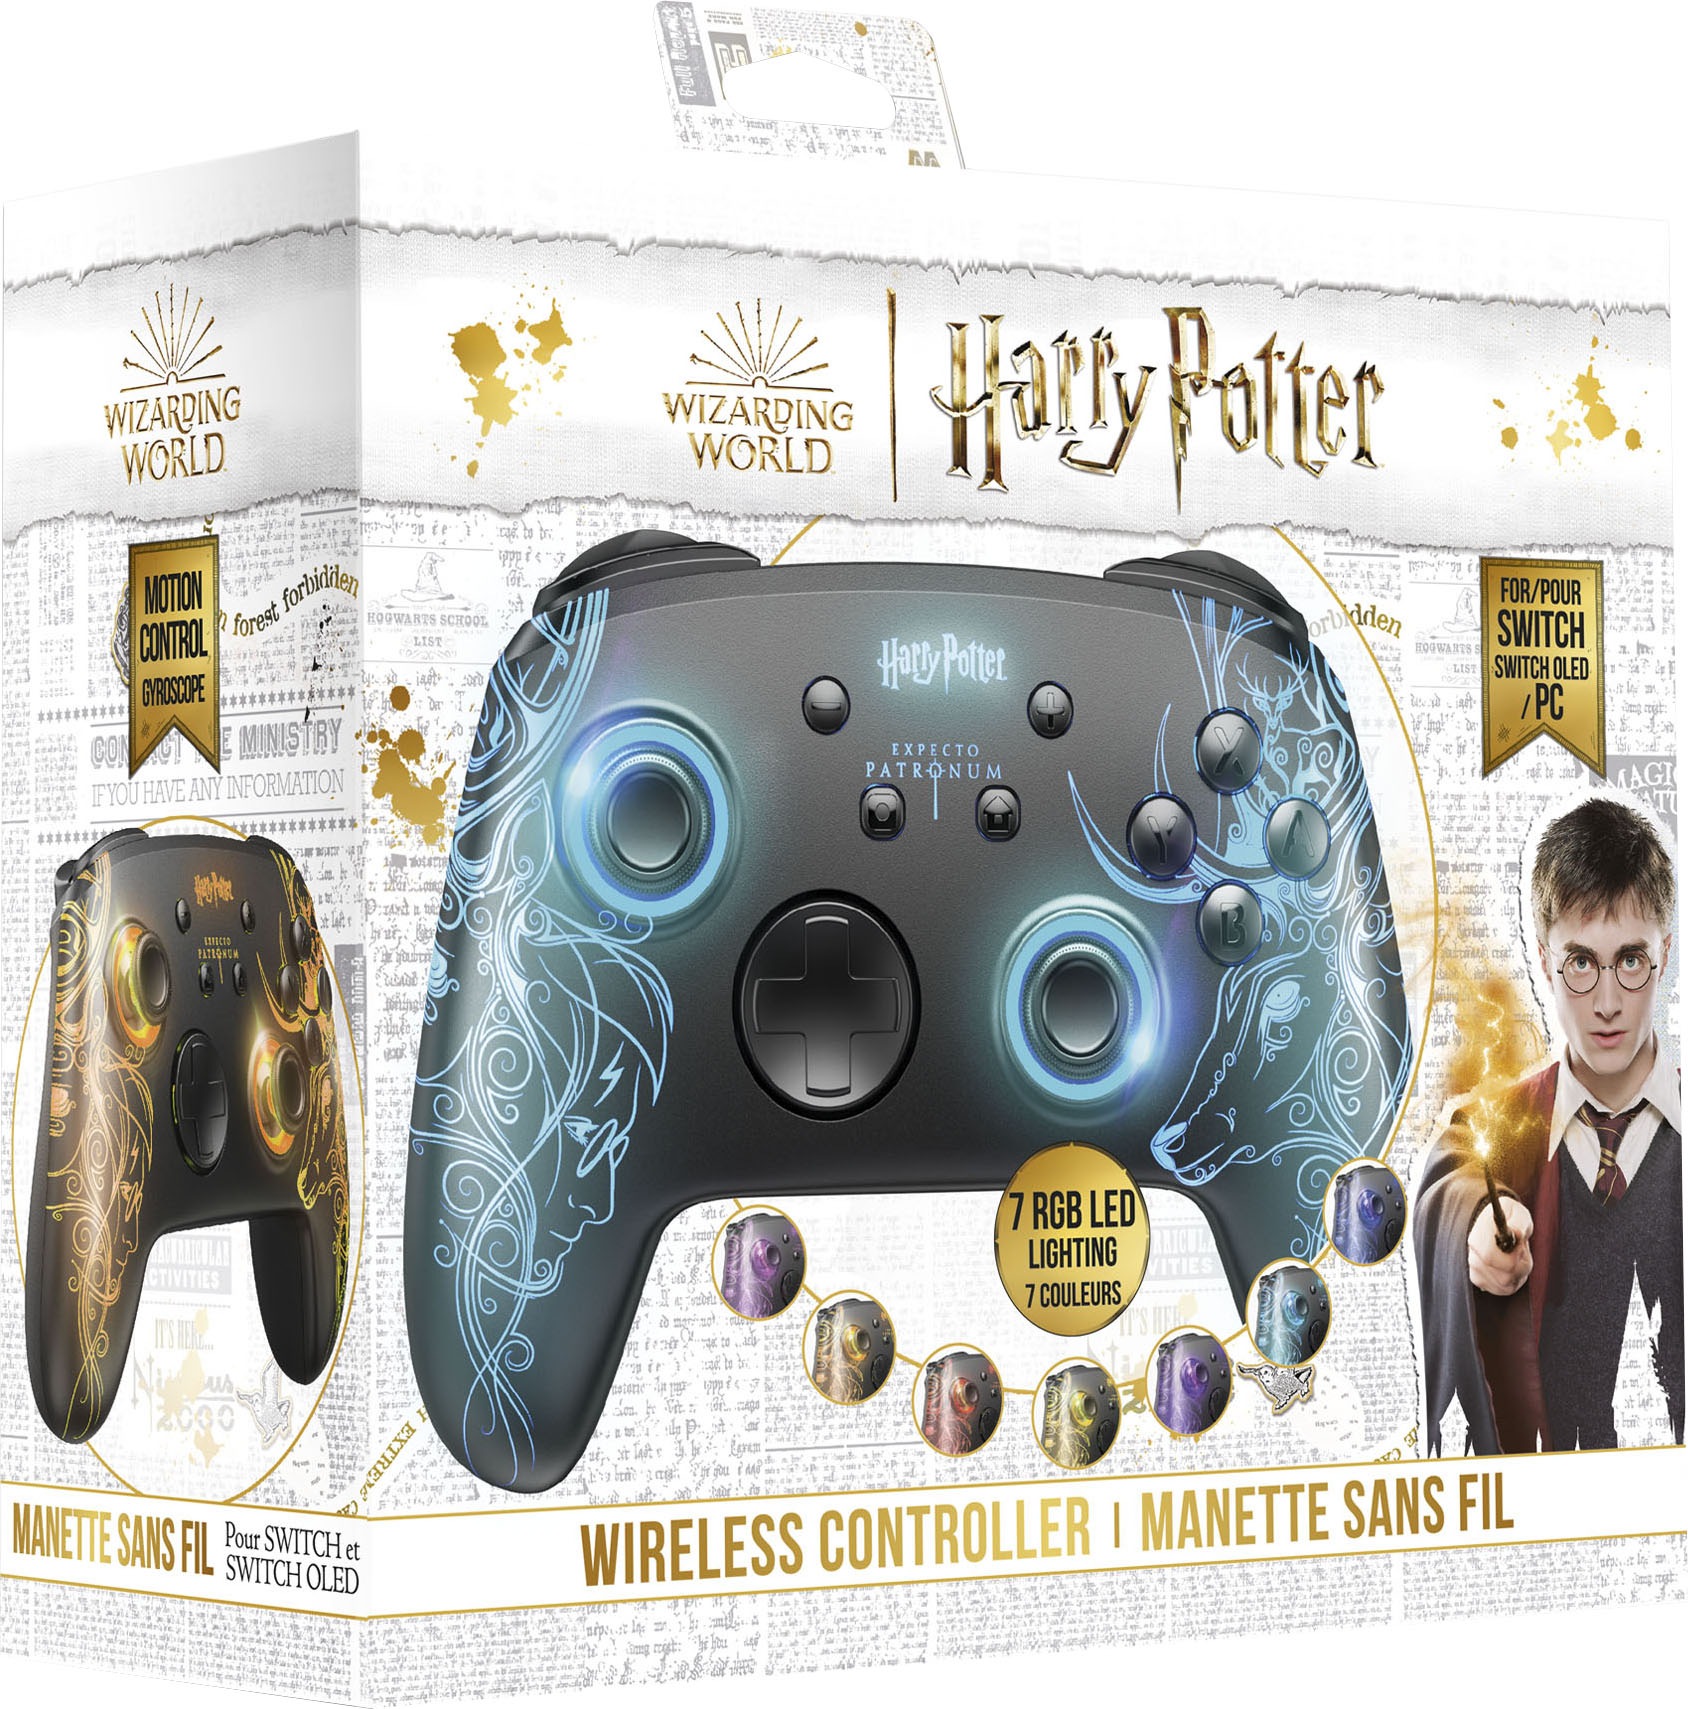 jetzt Freaks and Patronus online Wireless« Stag Nintendo-Controller Potter »Harry OTTO Geeks bei